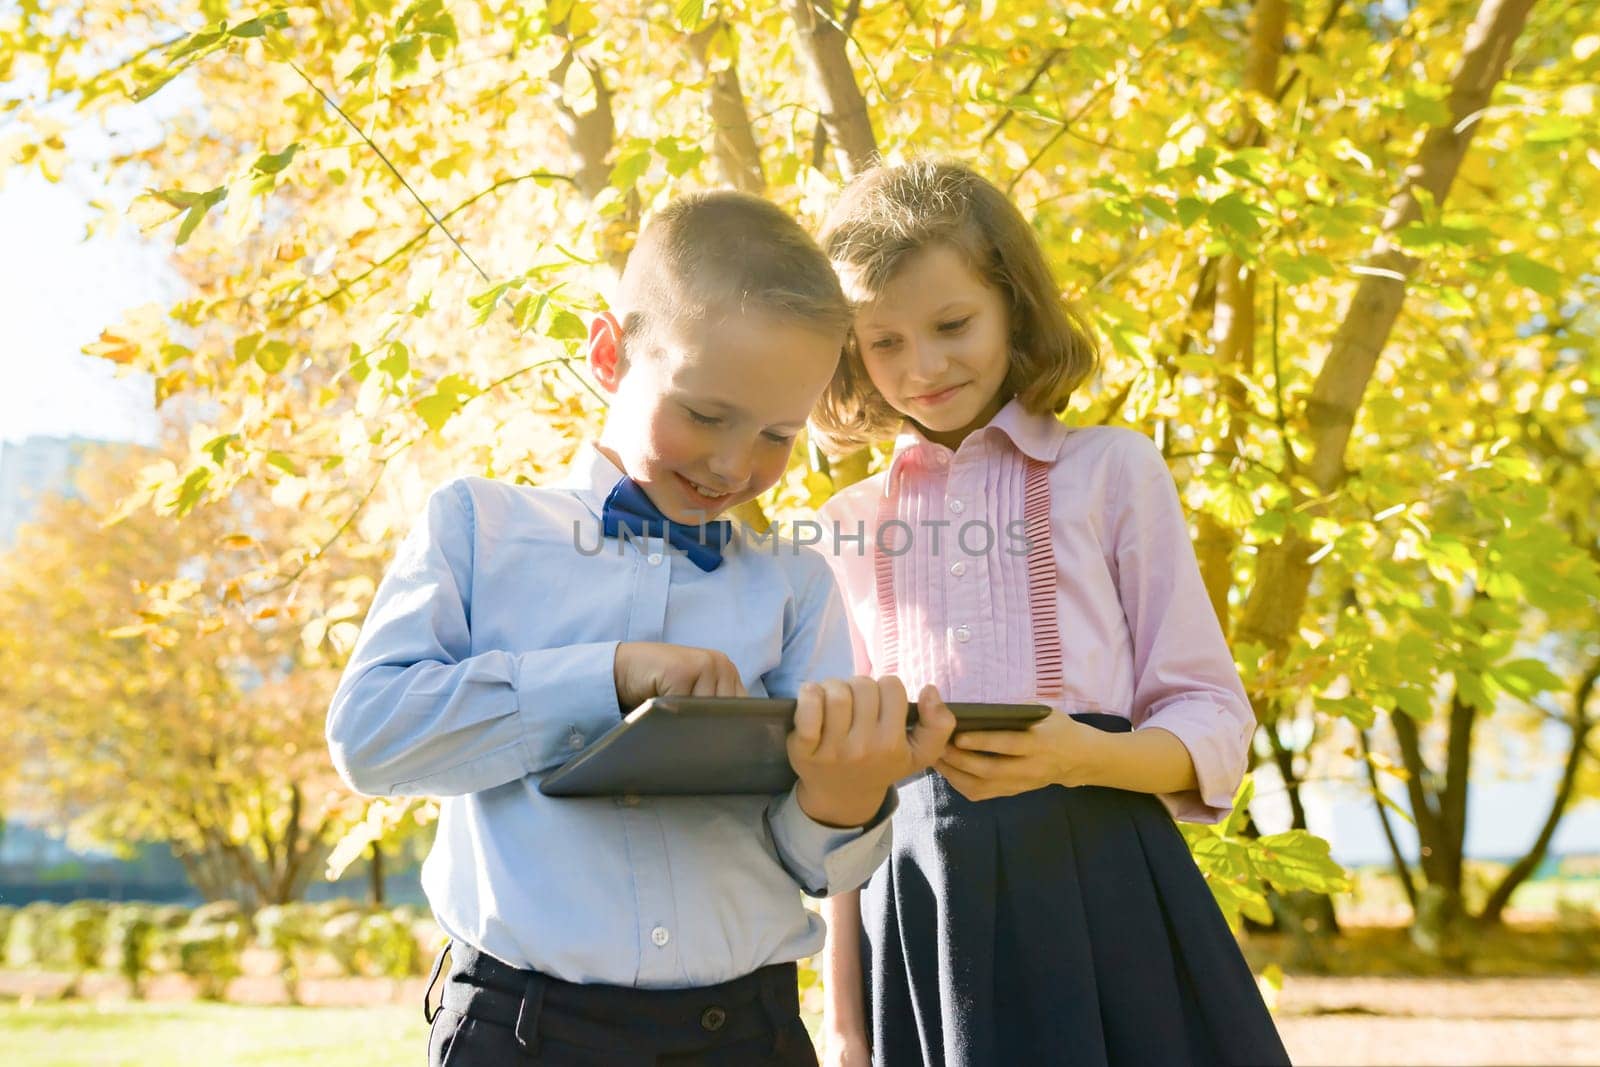 Two kids watching digital tablet, background autumn sunny park, golden hour